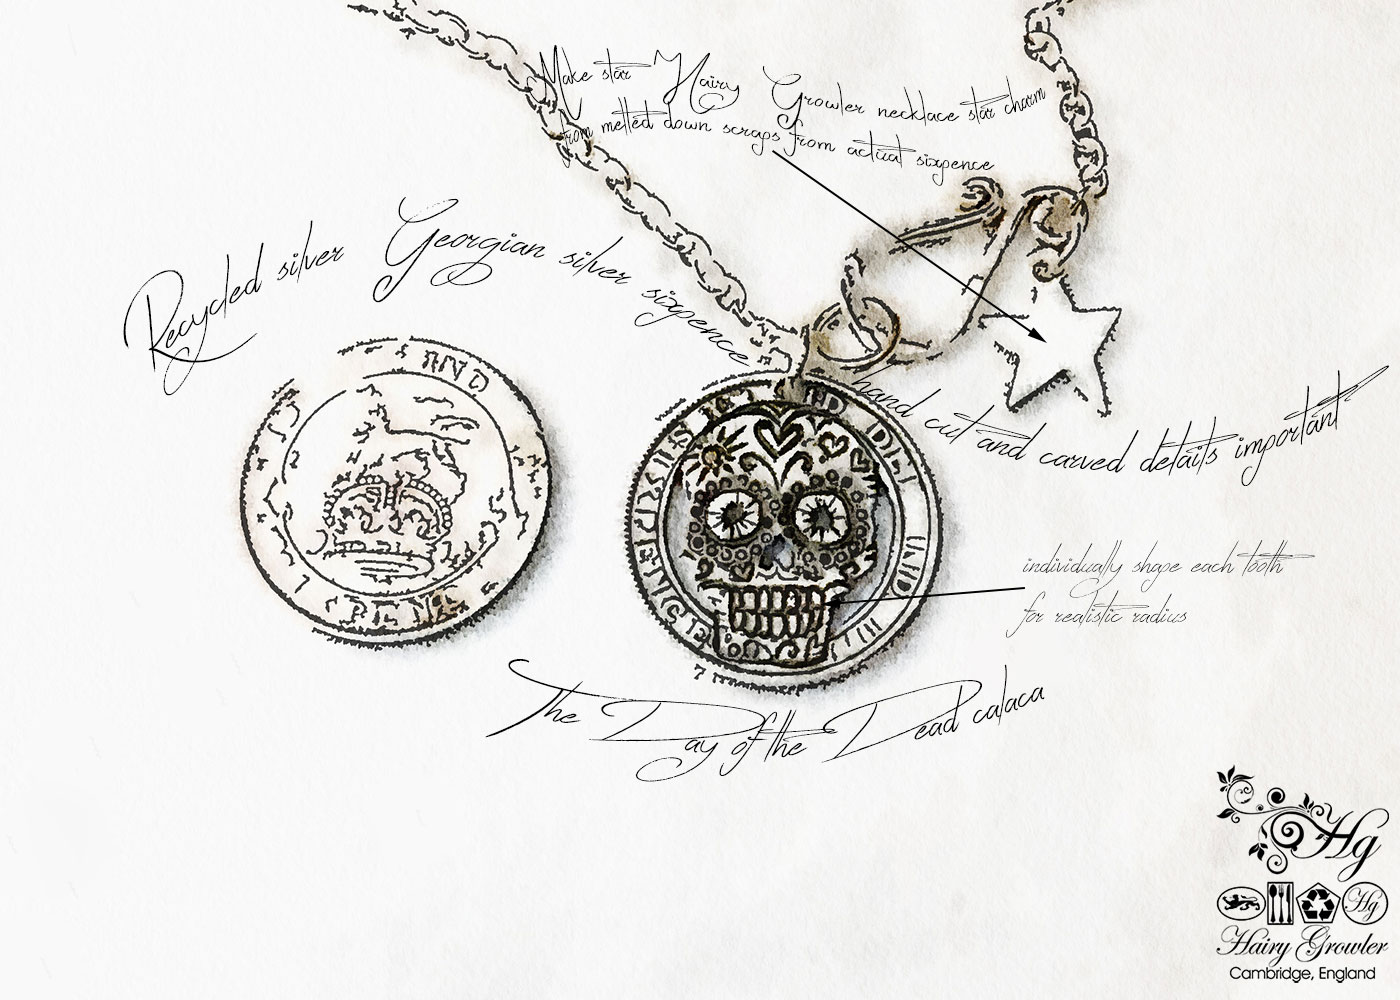 Hand-cut and recycled silver sixpence coin day-of-the-dead skull necklace